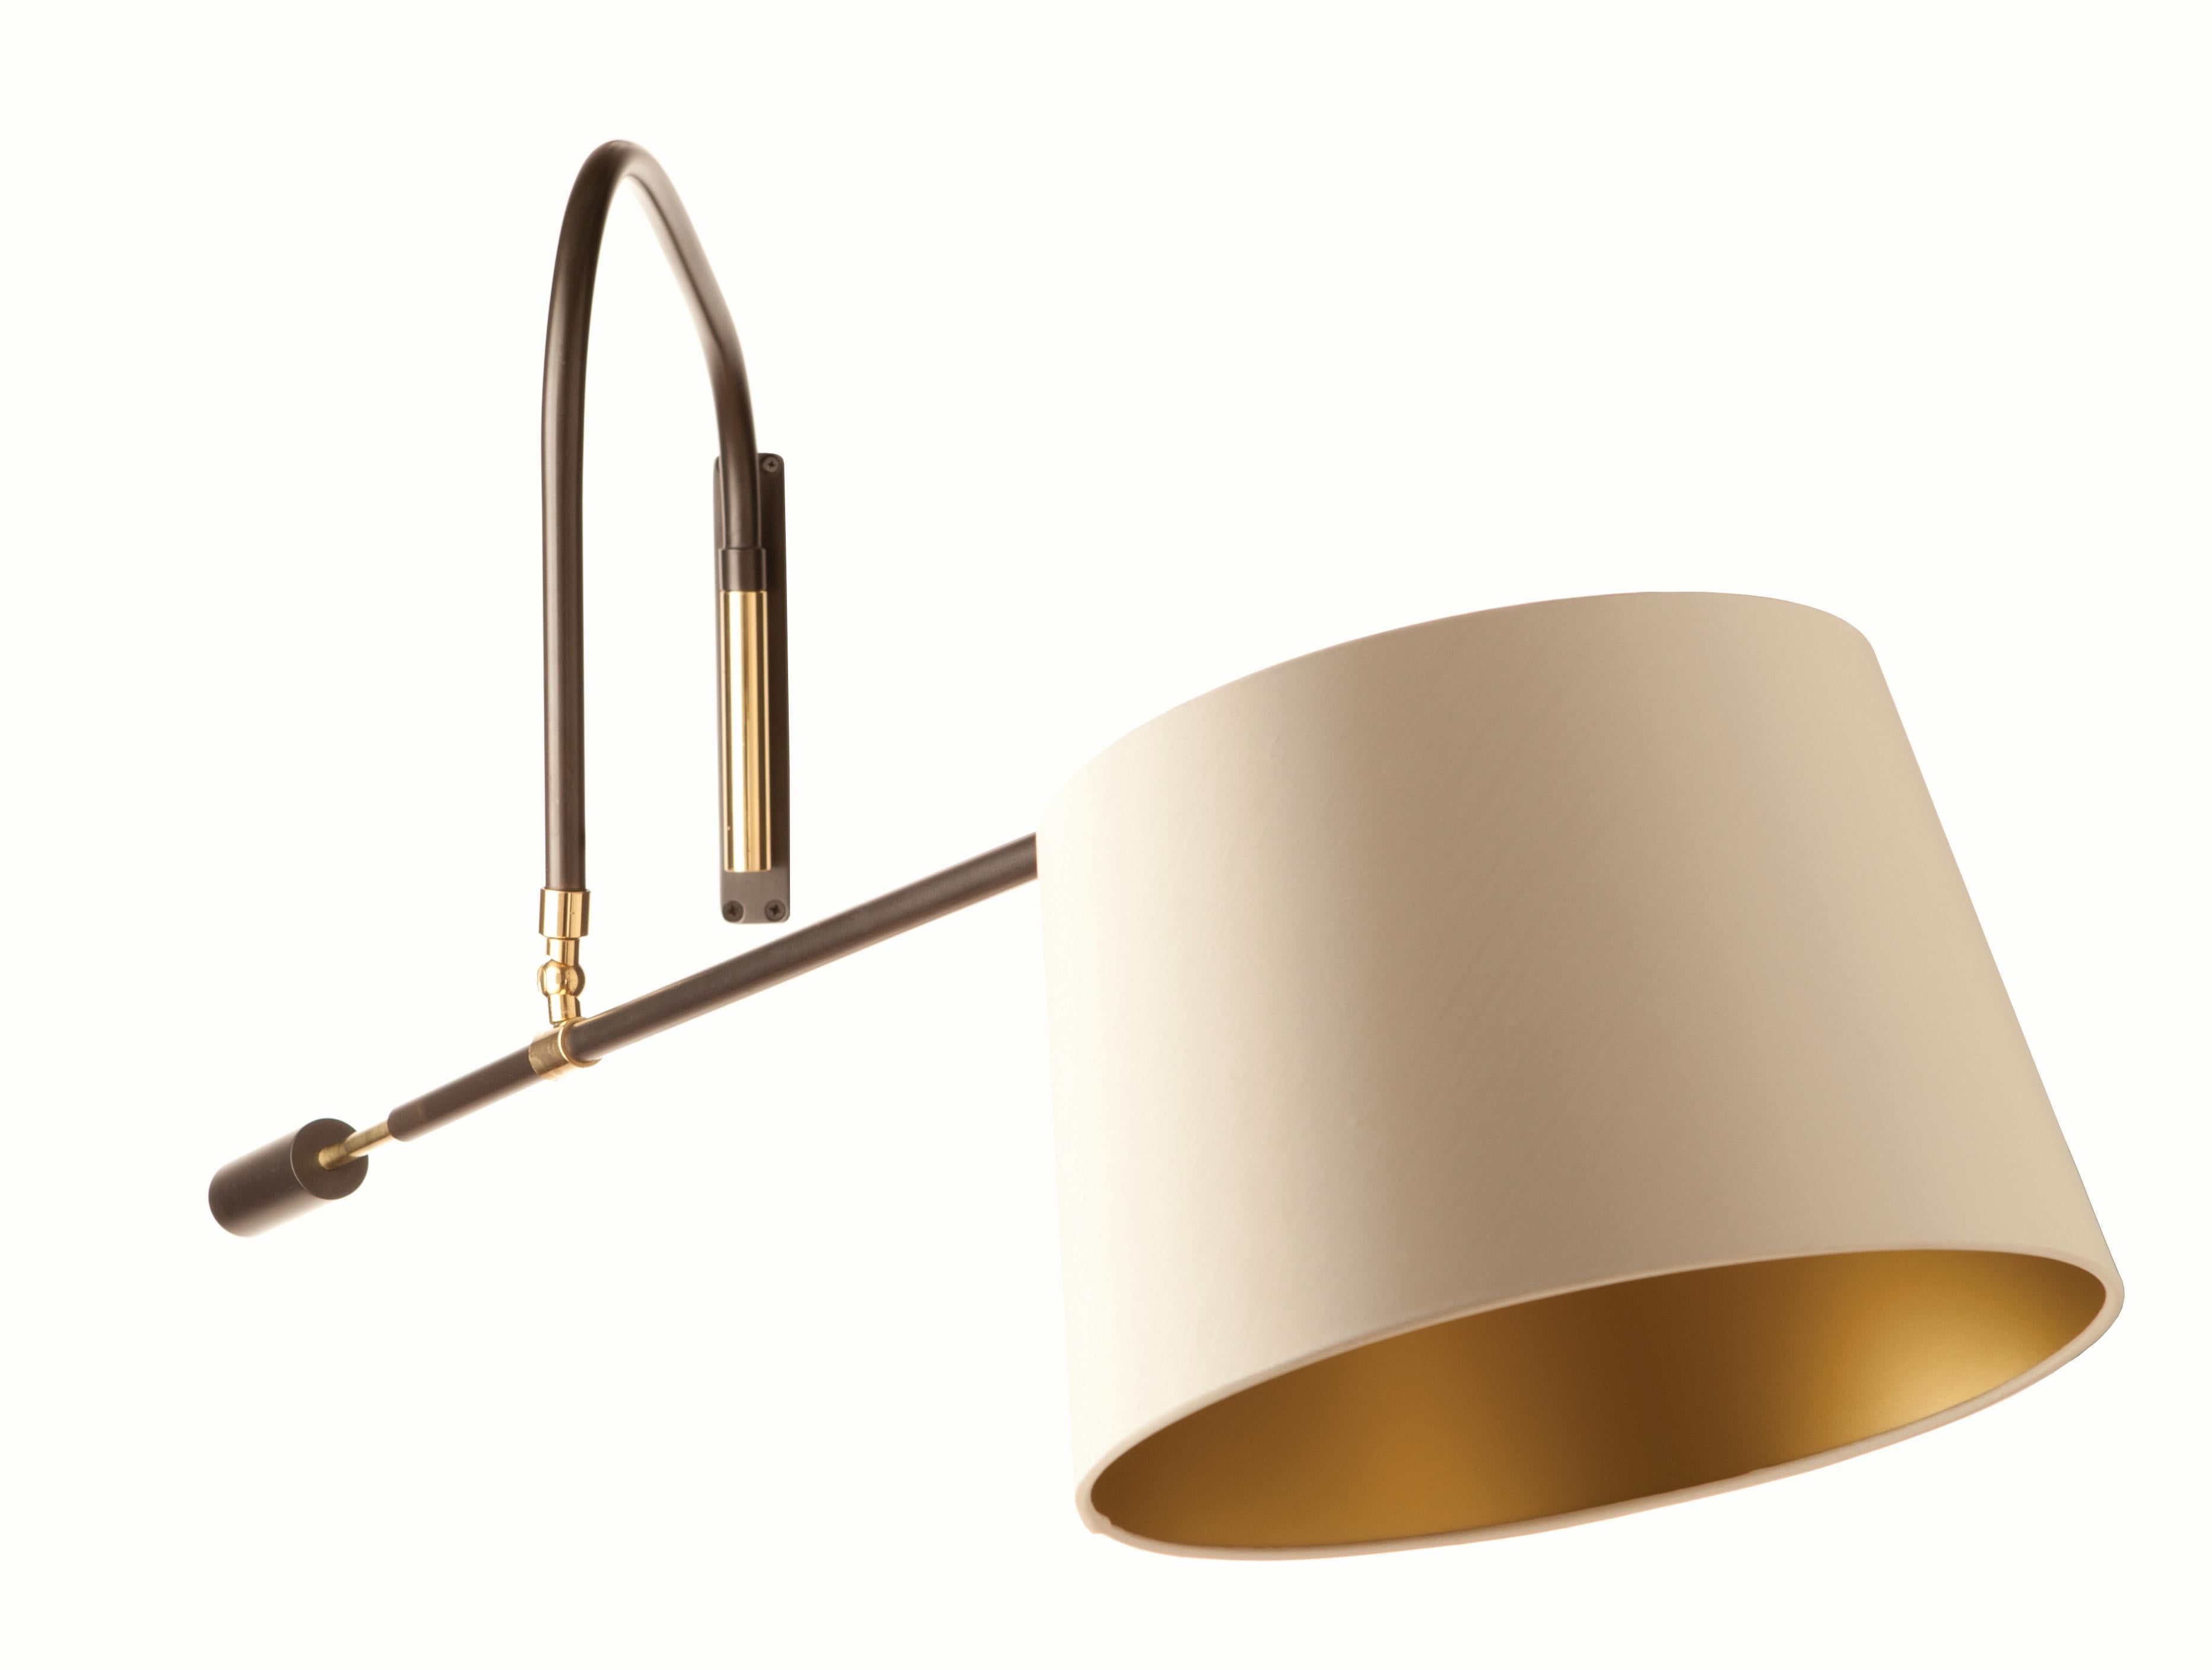 This is a unique huge cantilevered swing arm wall light which moves in many directions and made by the renowned lighting manufactures Martinez y Orts in Spain who have been creating stunning lighting since 1905

Made of cast brass the slender back